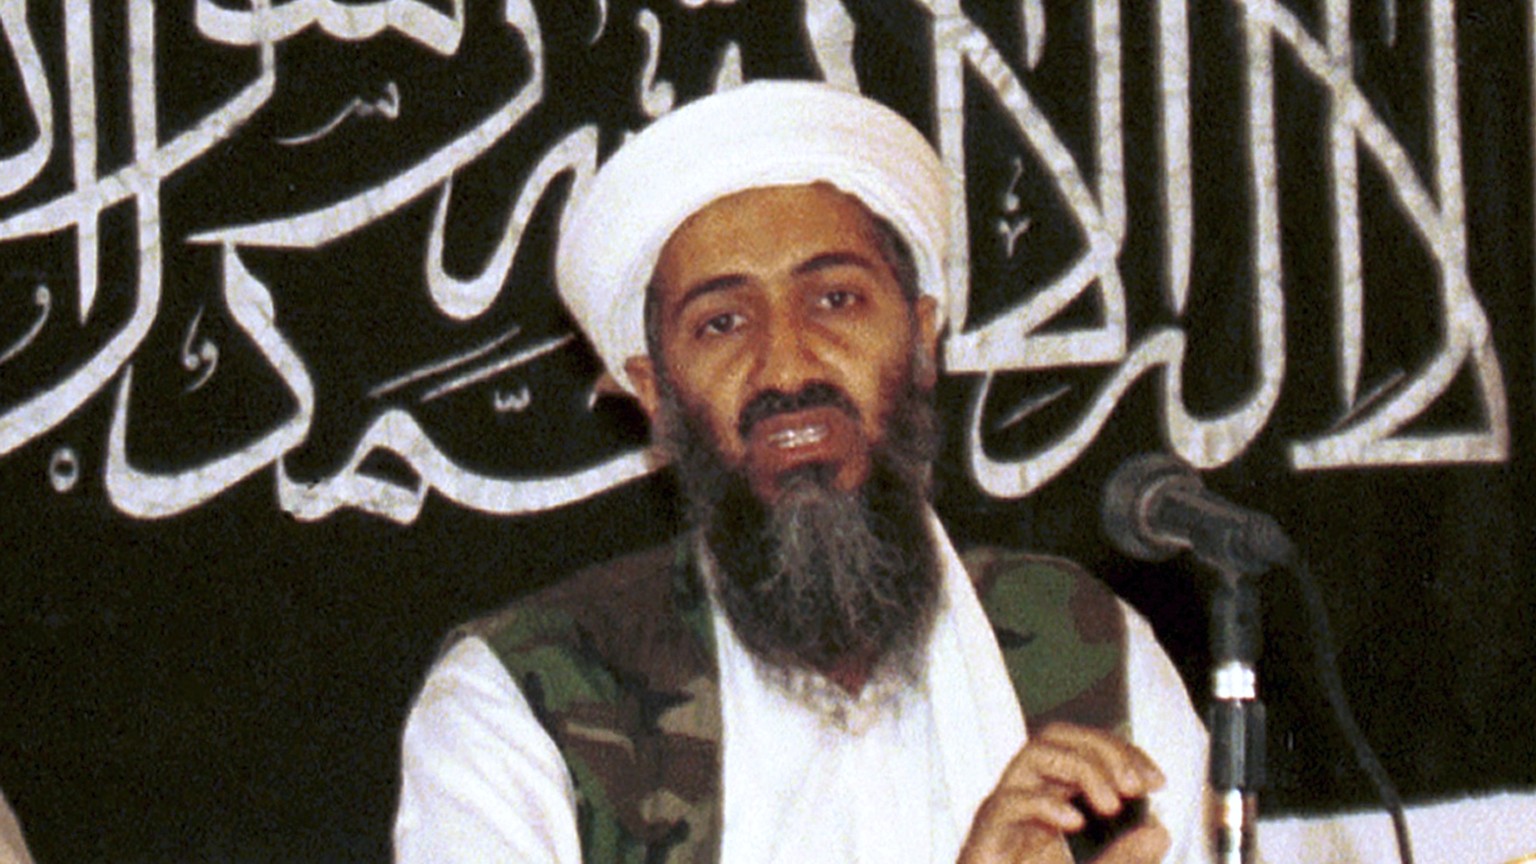 FILE - In this 1998 file photo made available on March 19, 2004, Osama bin Laden is seen at a news conference in Khost, Afghanistan. The United States carried out the most noteworthy assassination of  ...